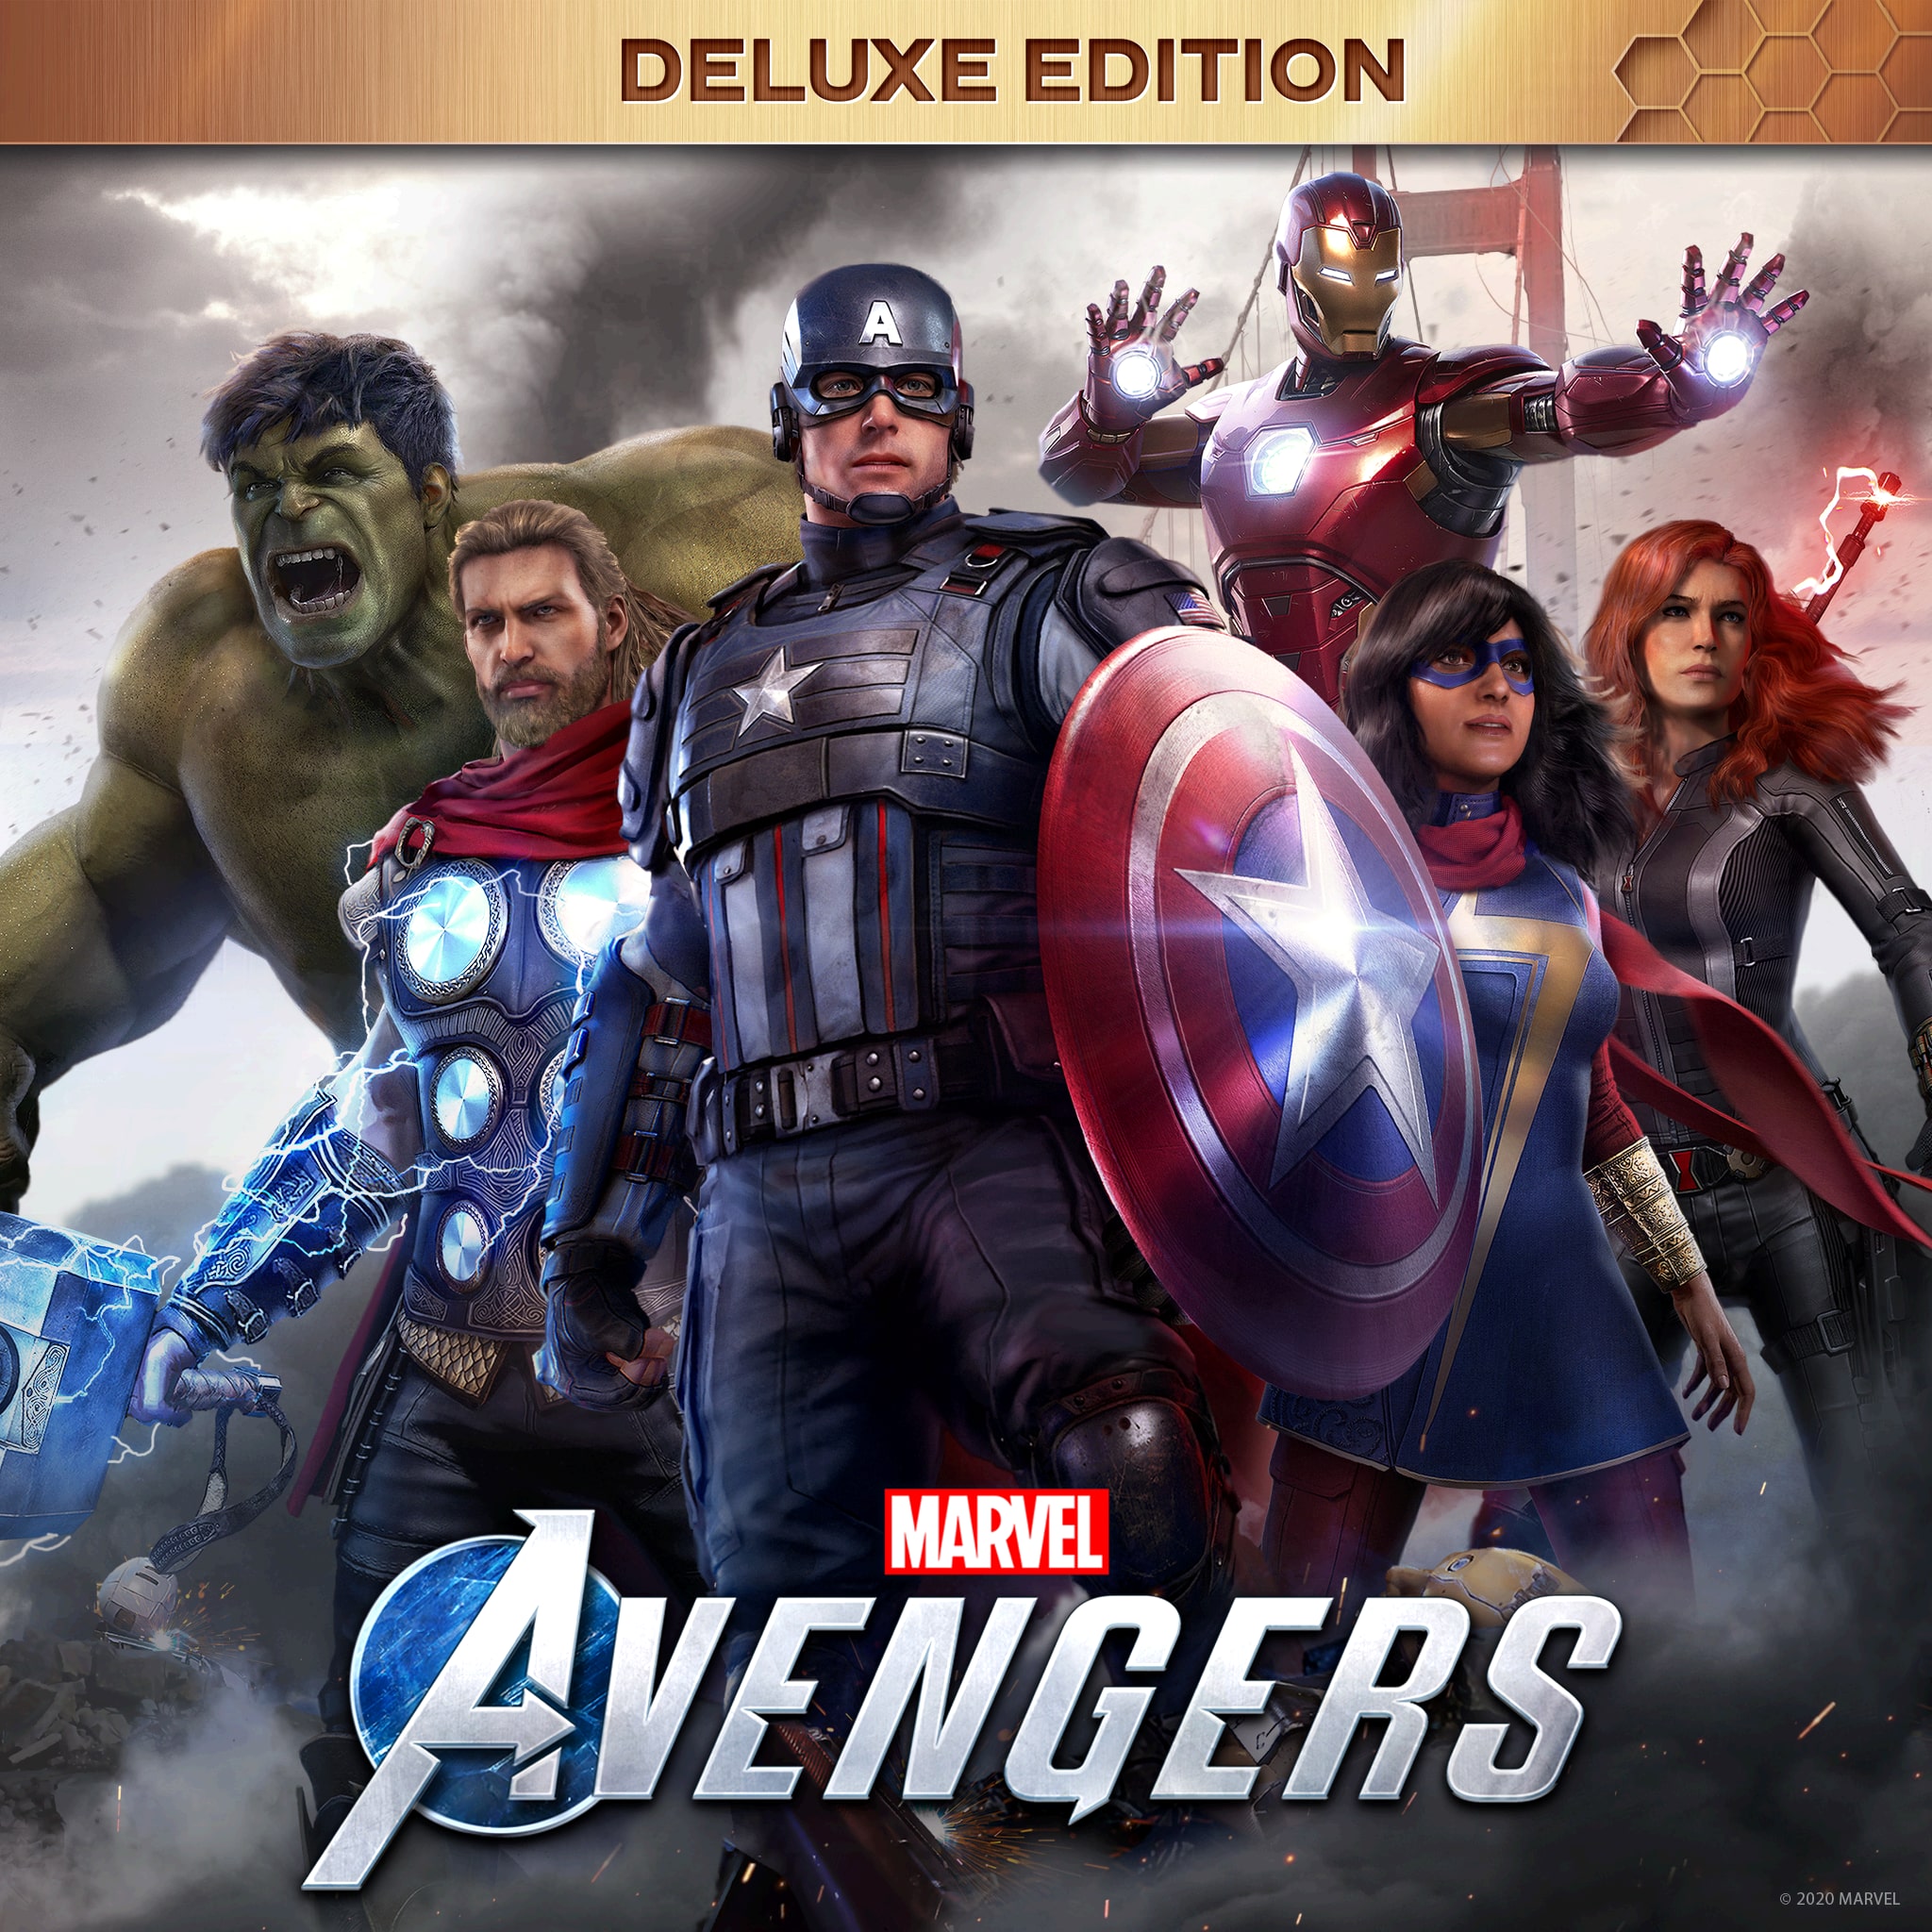 Marvel's Avengers: Deluxe Edition Content